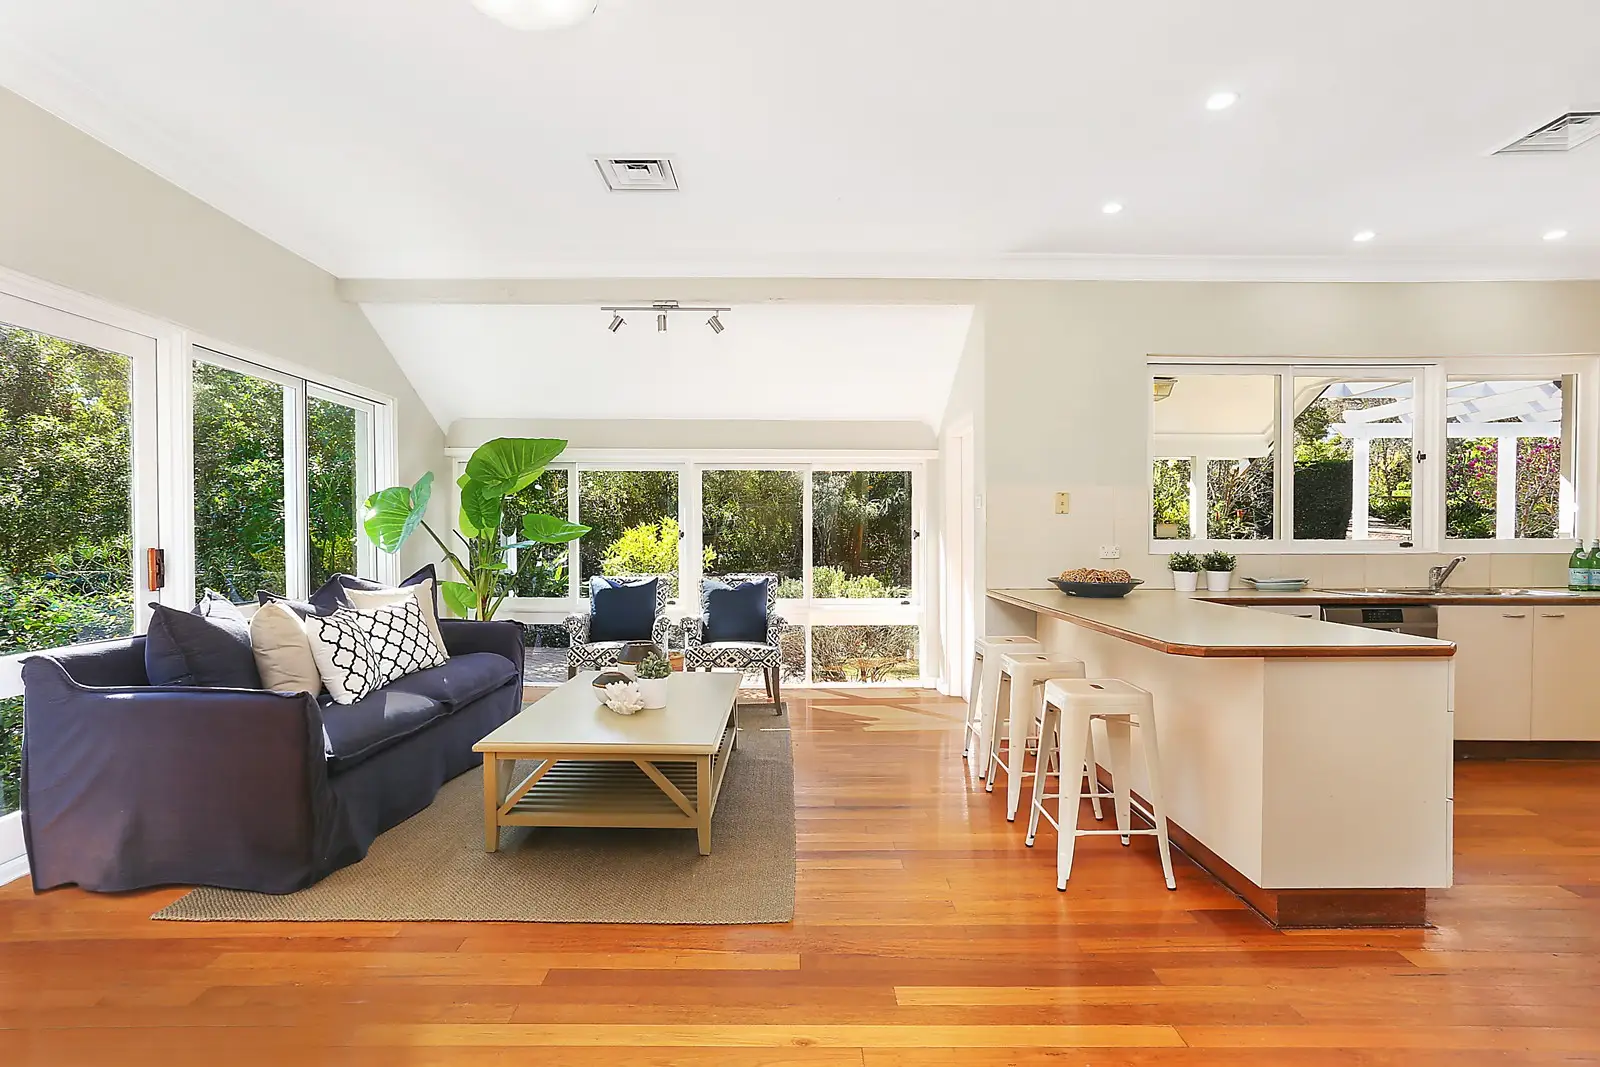 Photo #3: 98 Beechworth Road, Pymble - Sold by Sydney Sotheby's International Realty